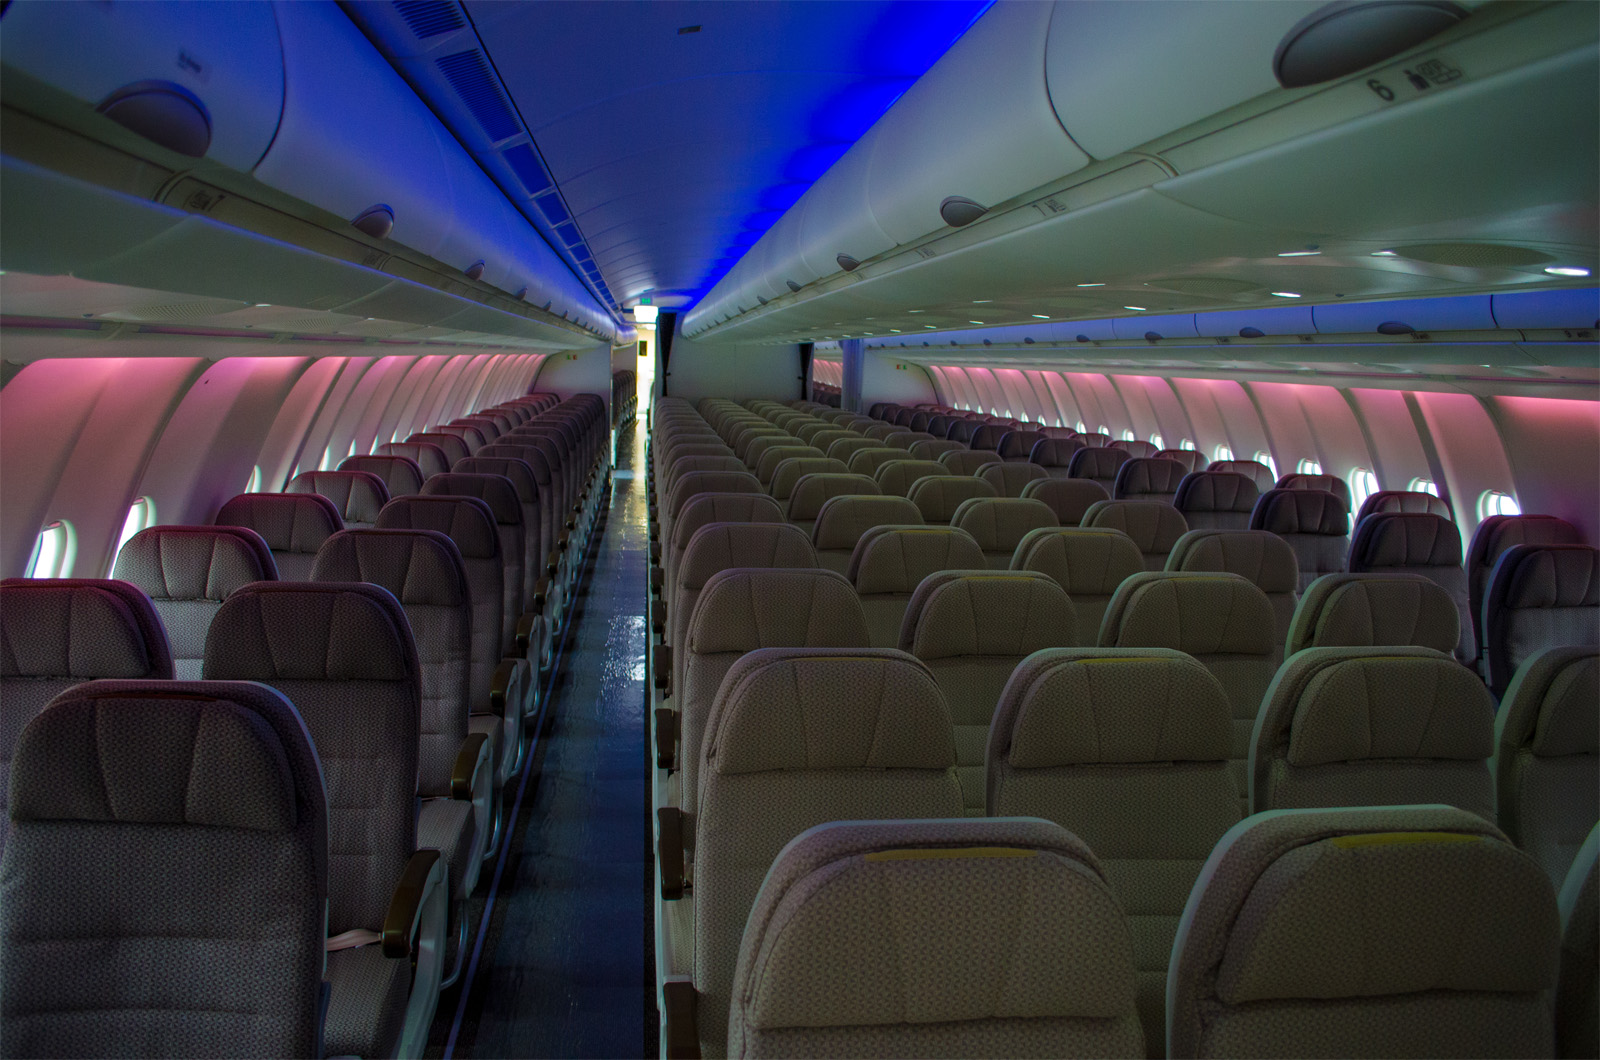 The Led Lighting In Economy On Fiji Airways Airbus A330